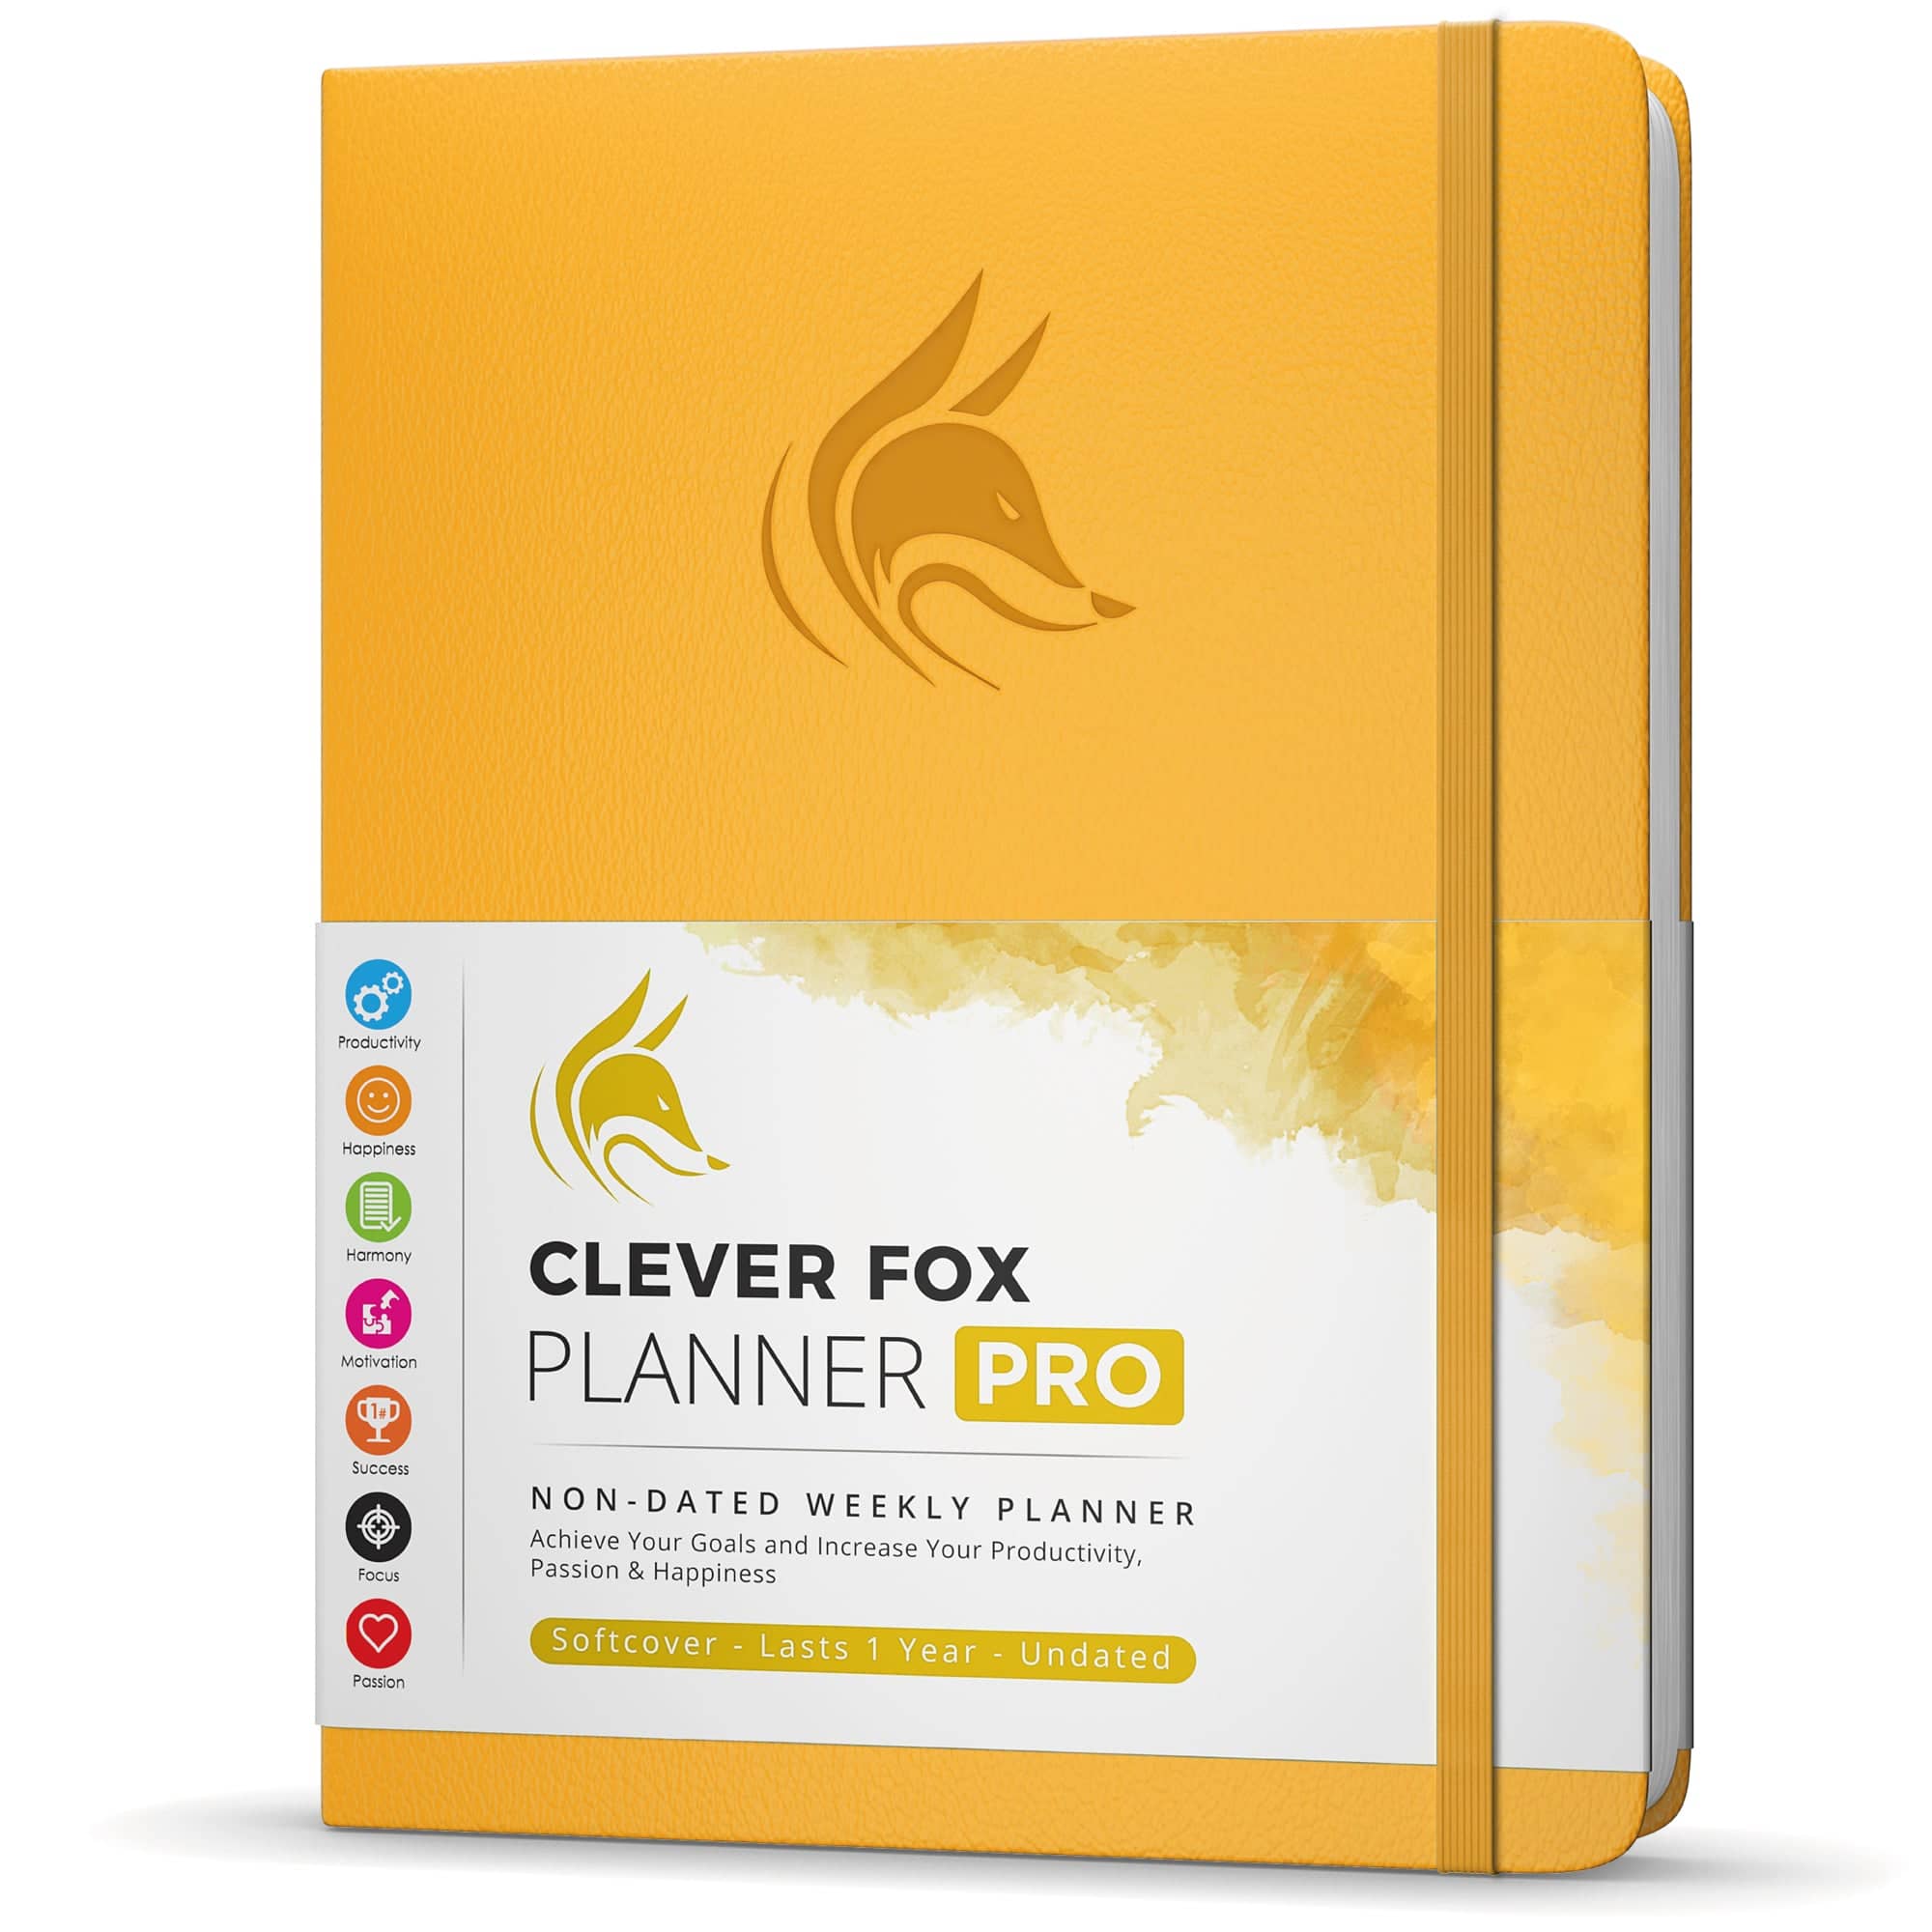 Clever Fox Planner PRO - Amber Yellow - image 1 of 6